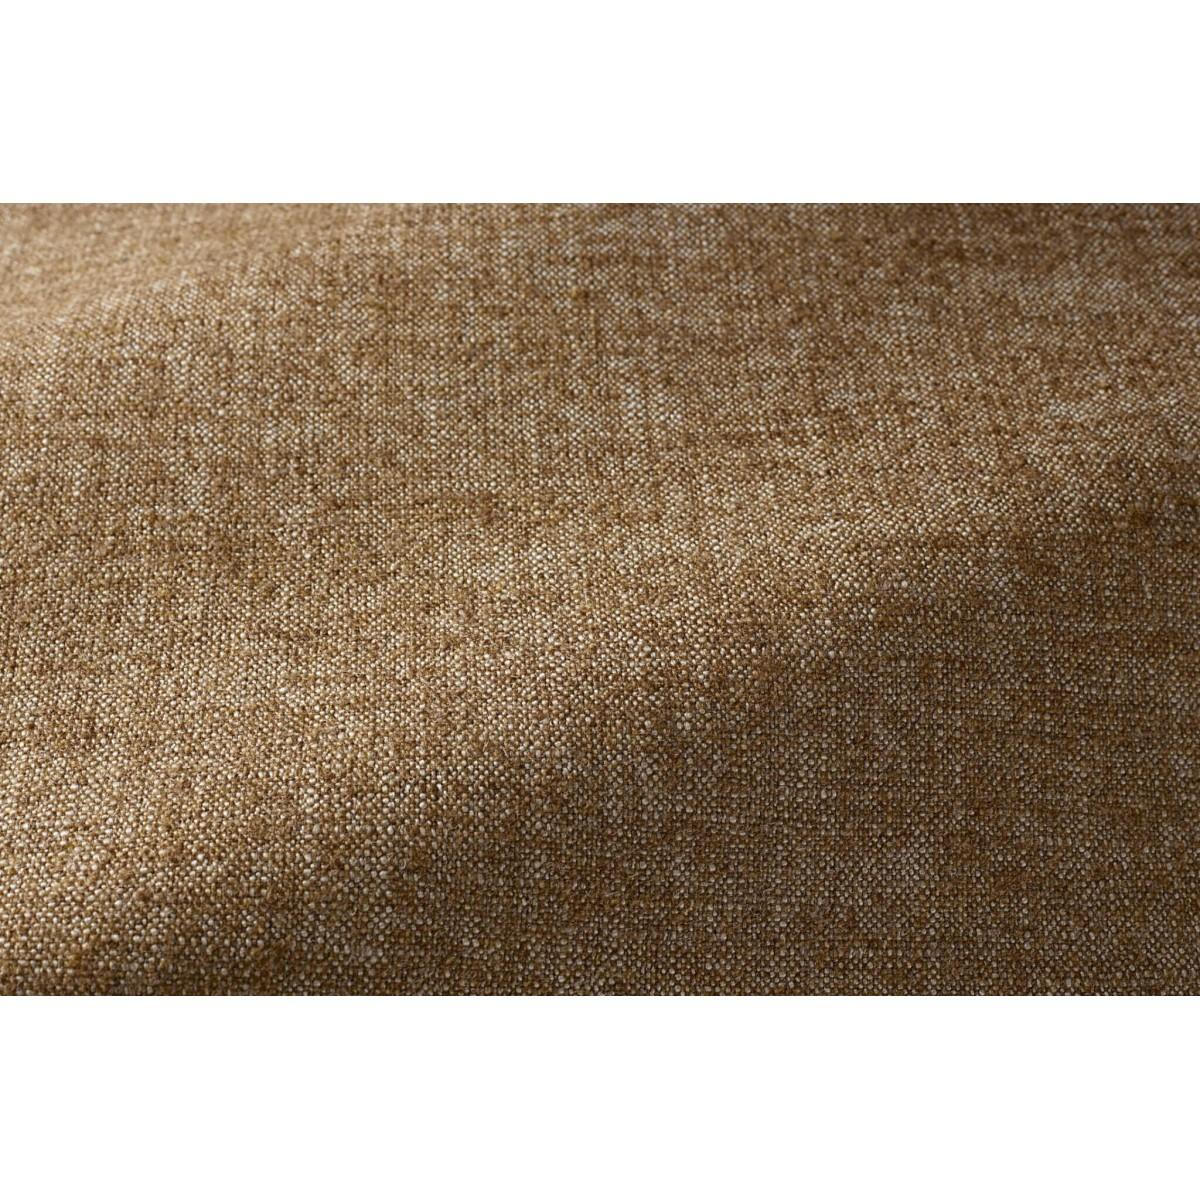 Popus Editions Giovanna 2.5 seater sofa in Ocher London Linen Fabric

Giovanna is a sofa with a strong profile. A sober, plush line, with this famous detail that changes everything, so as not to forget its strength of character and this charming